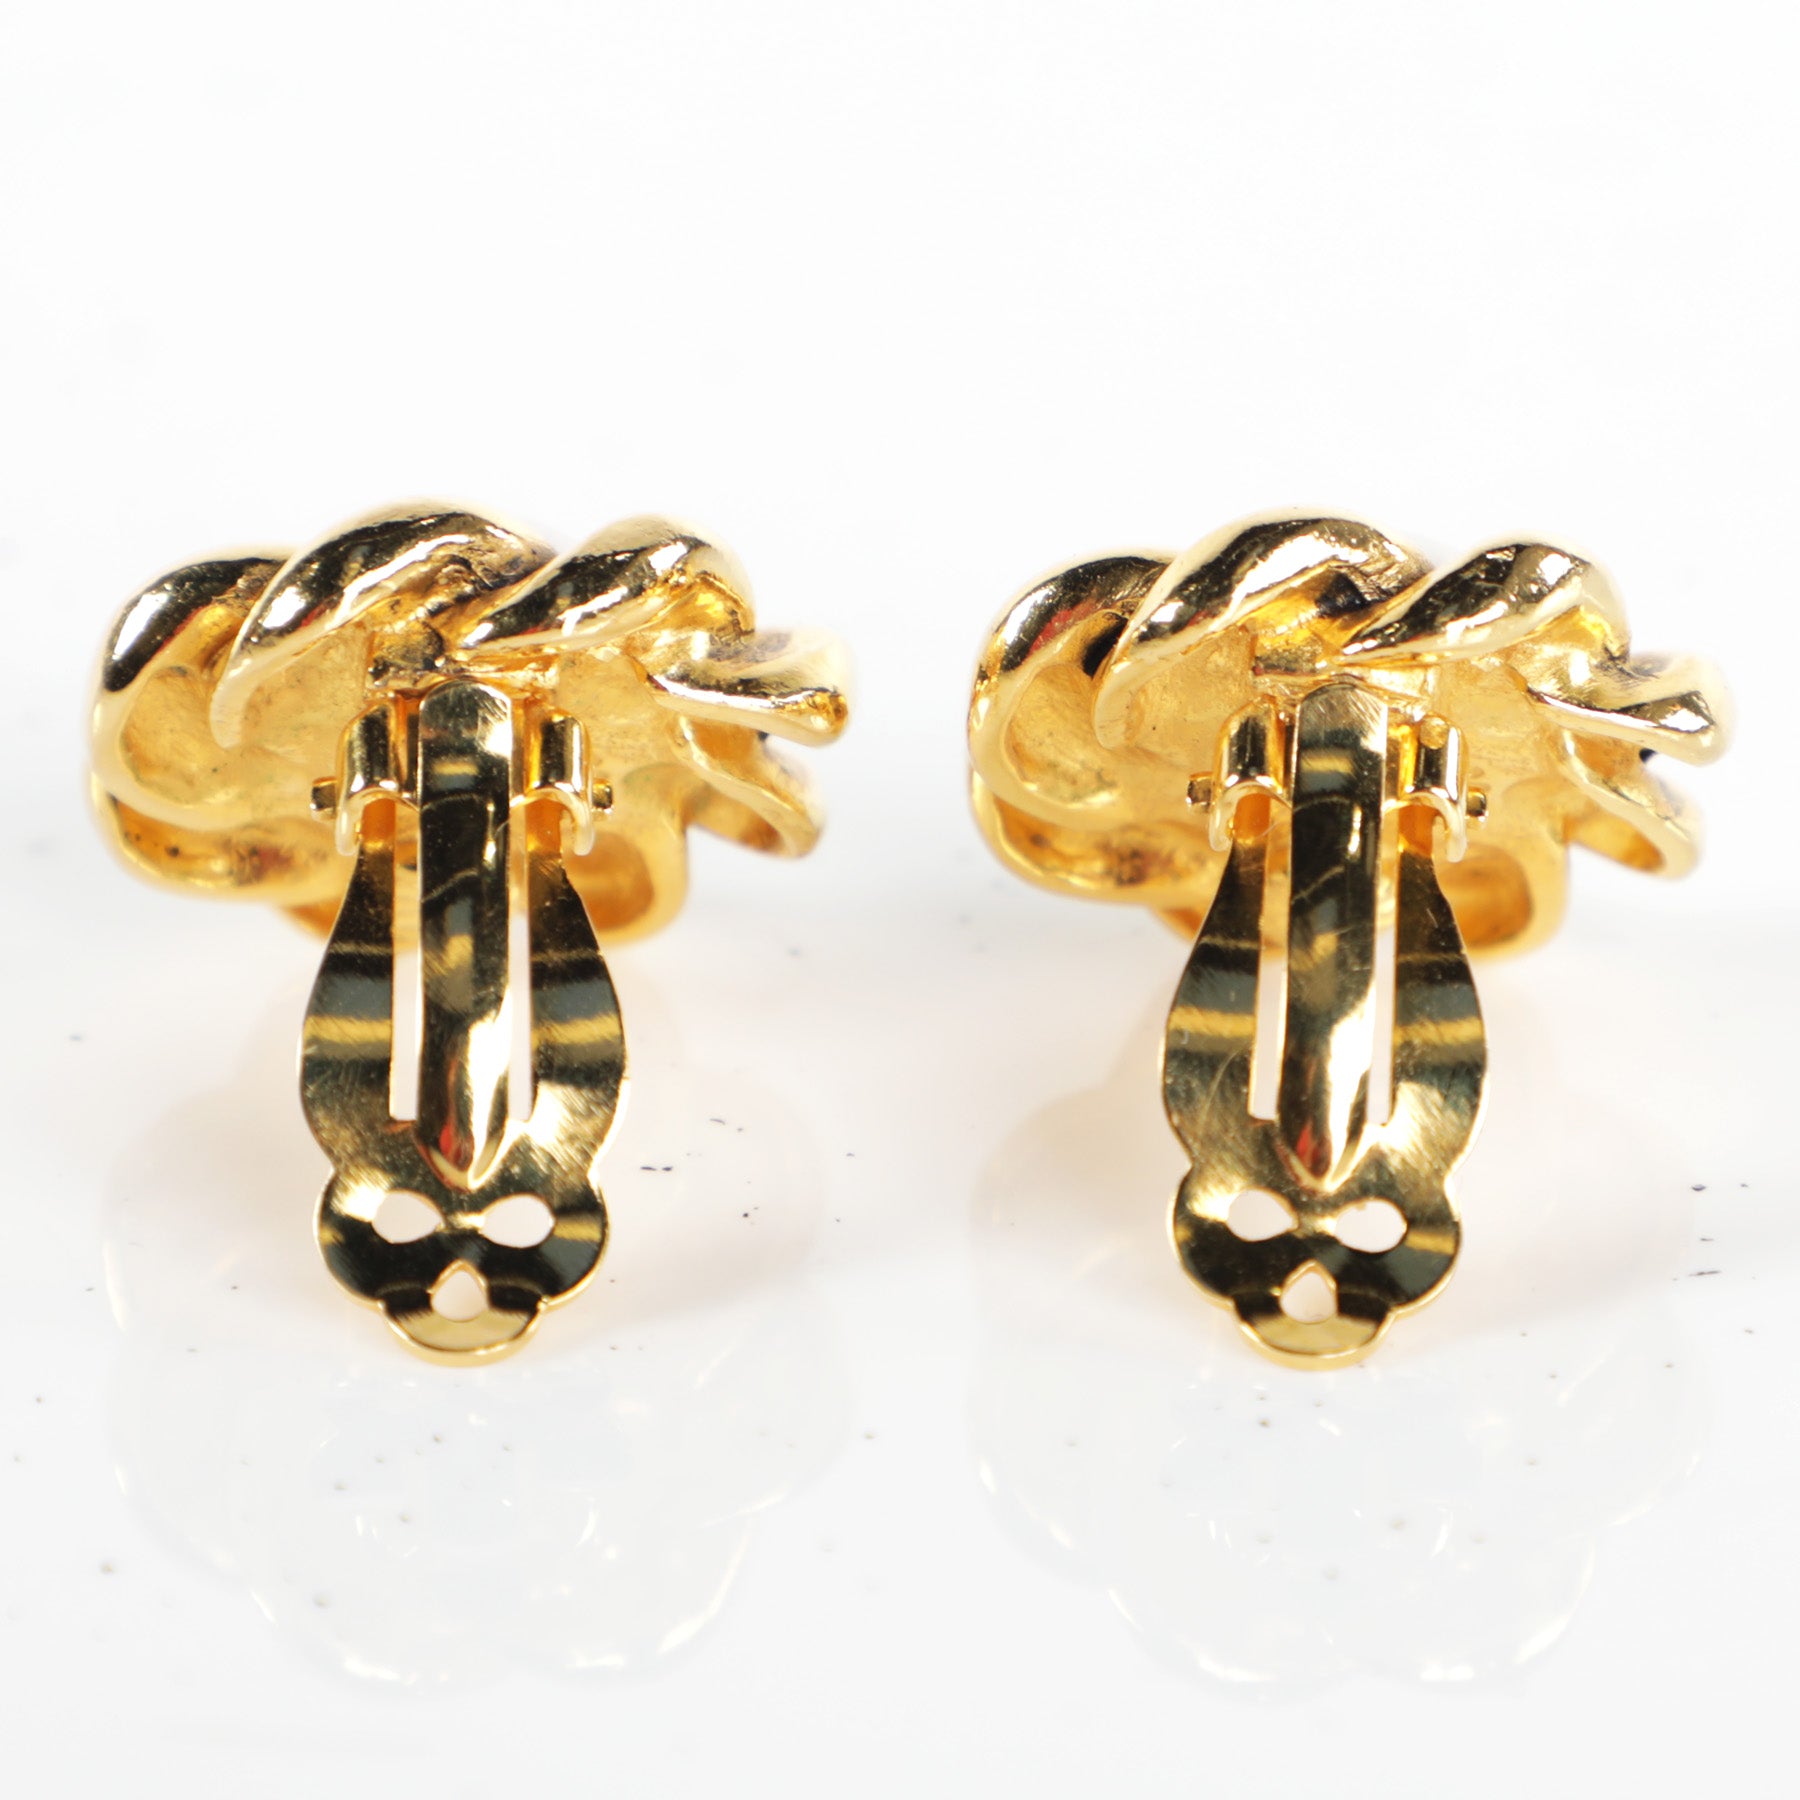 Chanel Vintage Gold Plated Cc Rope Triangle Clip On Earrings - 2 Pieces